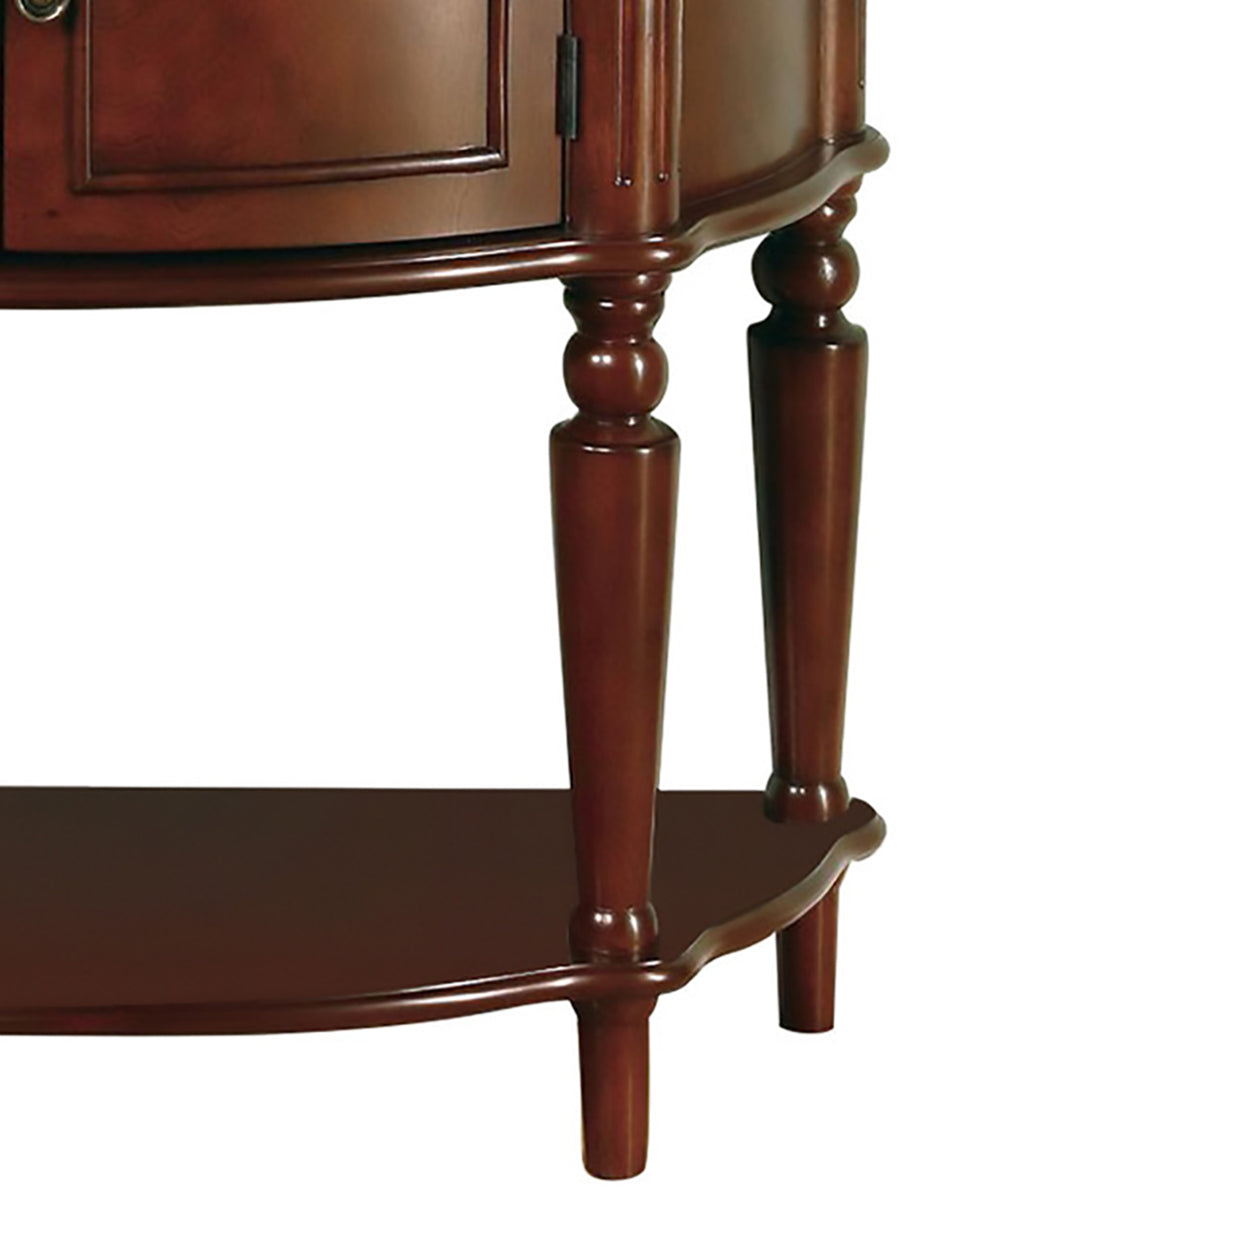 Console Table with Curved Front Brown